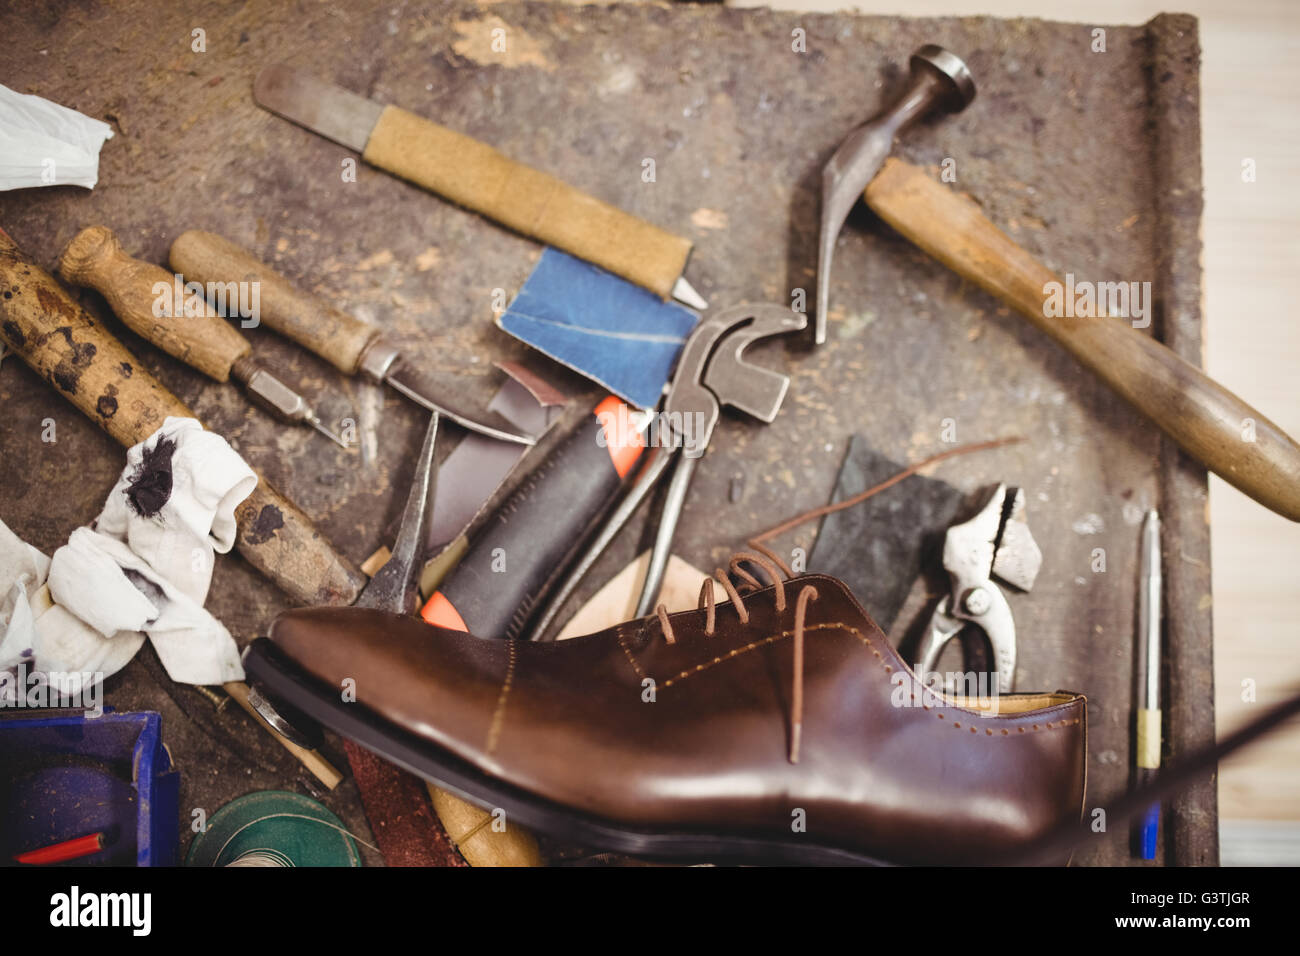 Tools of cobbler and a shoe on a table Stock Photo